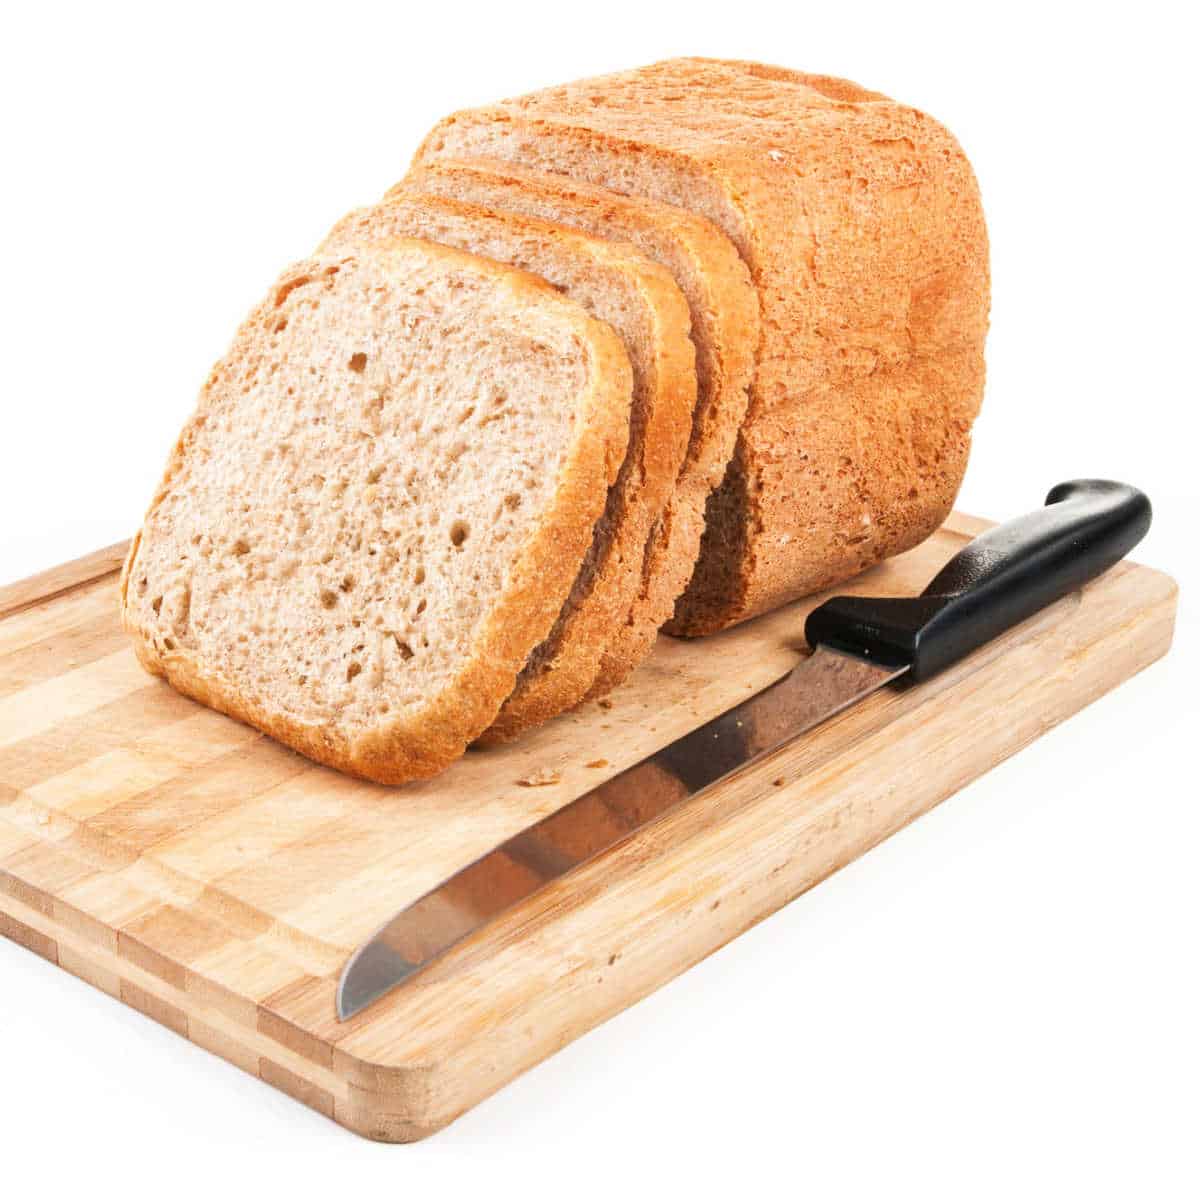 Loaf of Anadama Bread partially sliced on wooden cutting board with serrated knife next to it.